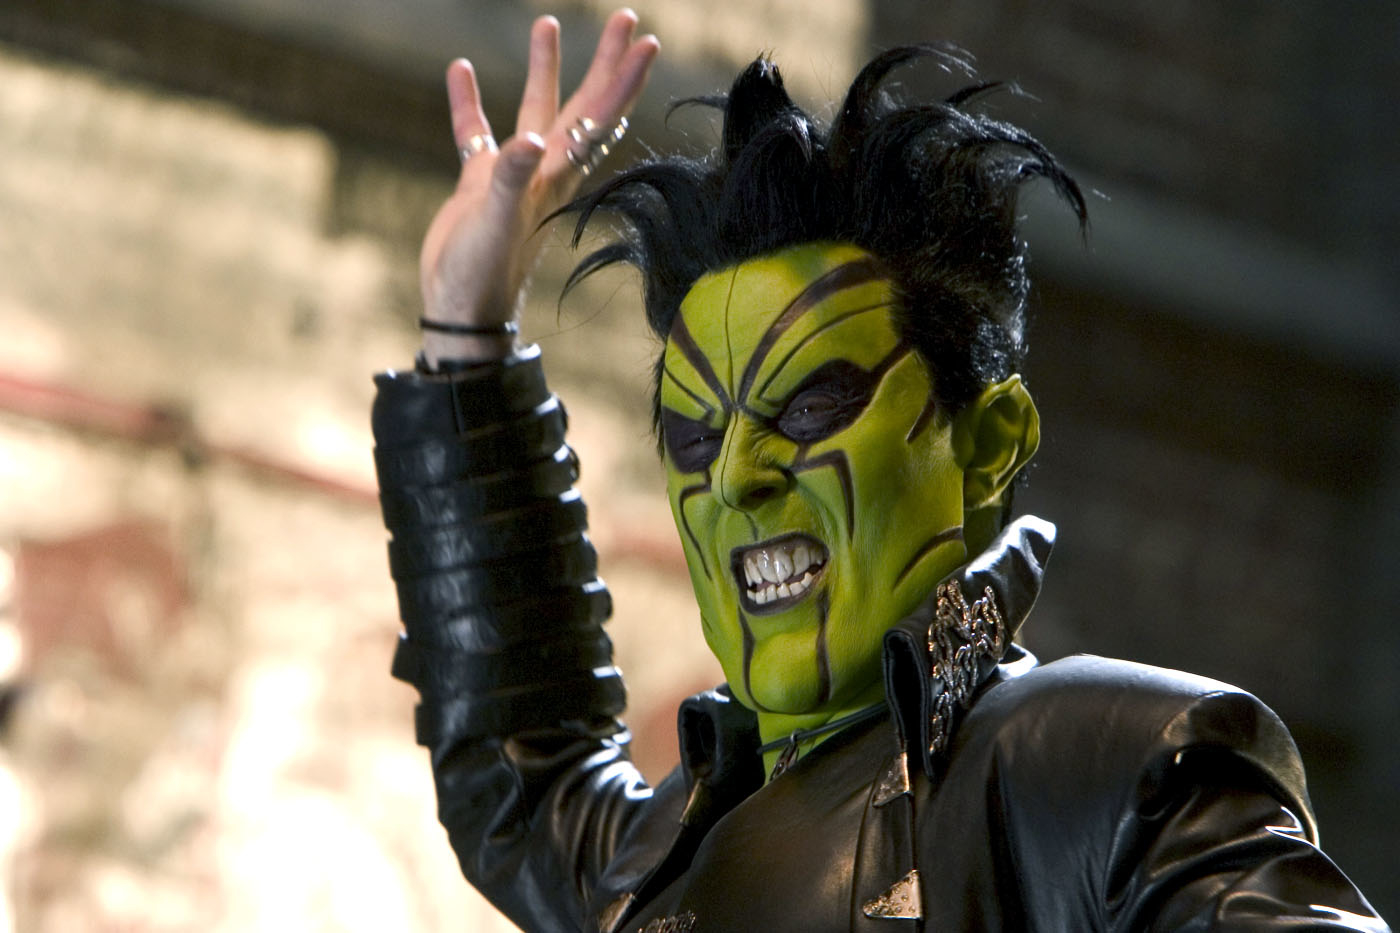 Alan Cumming with spiked hair and face paint in a scene